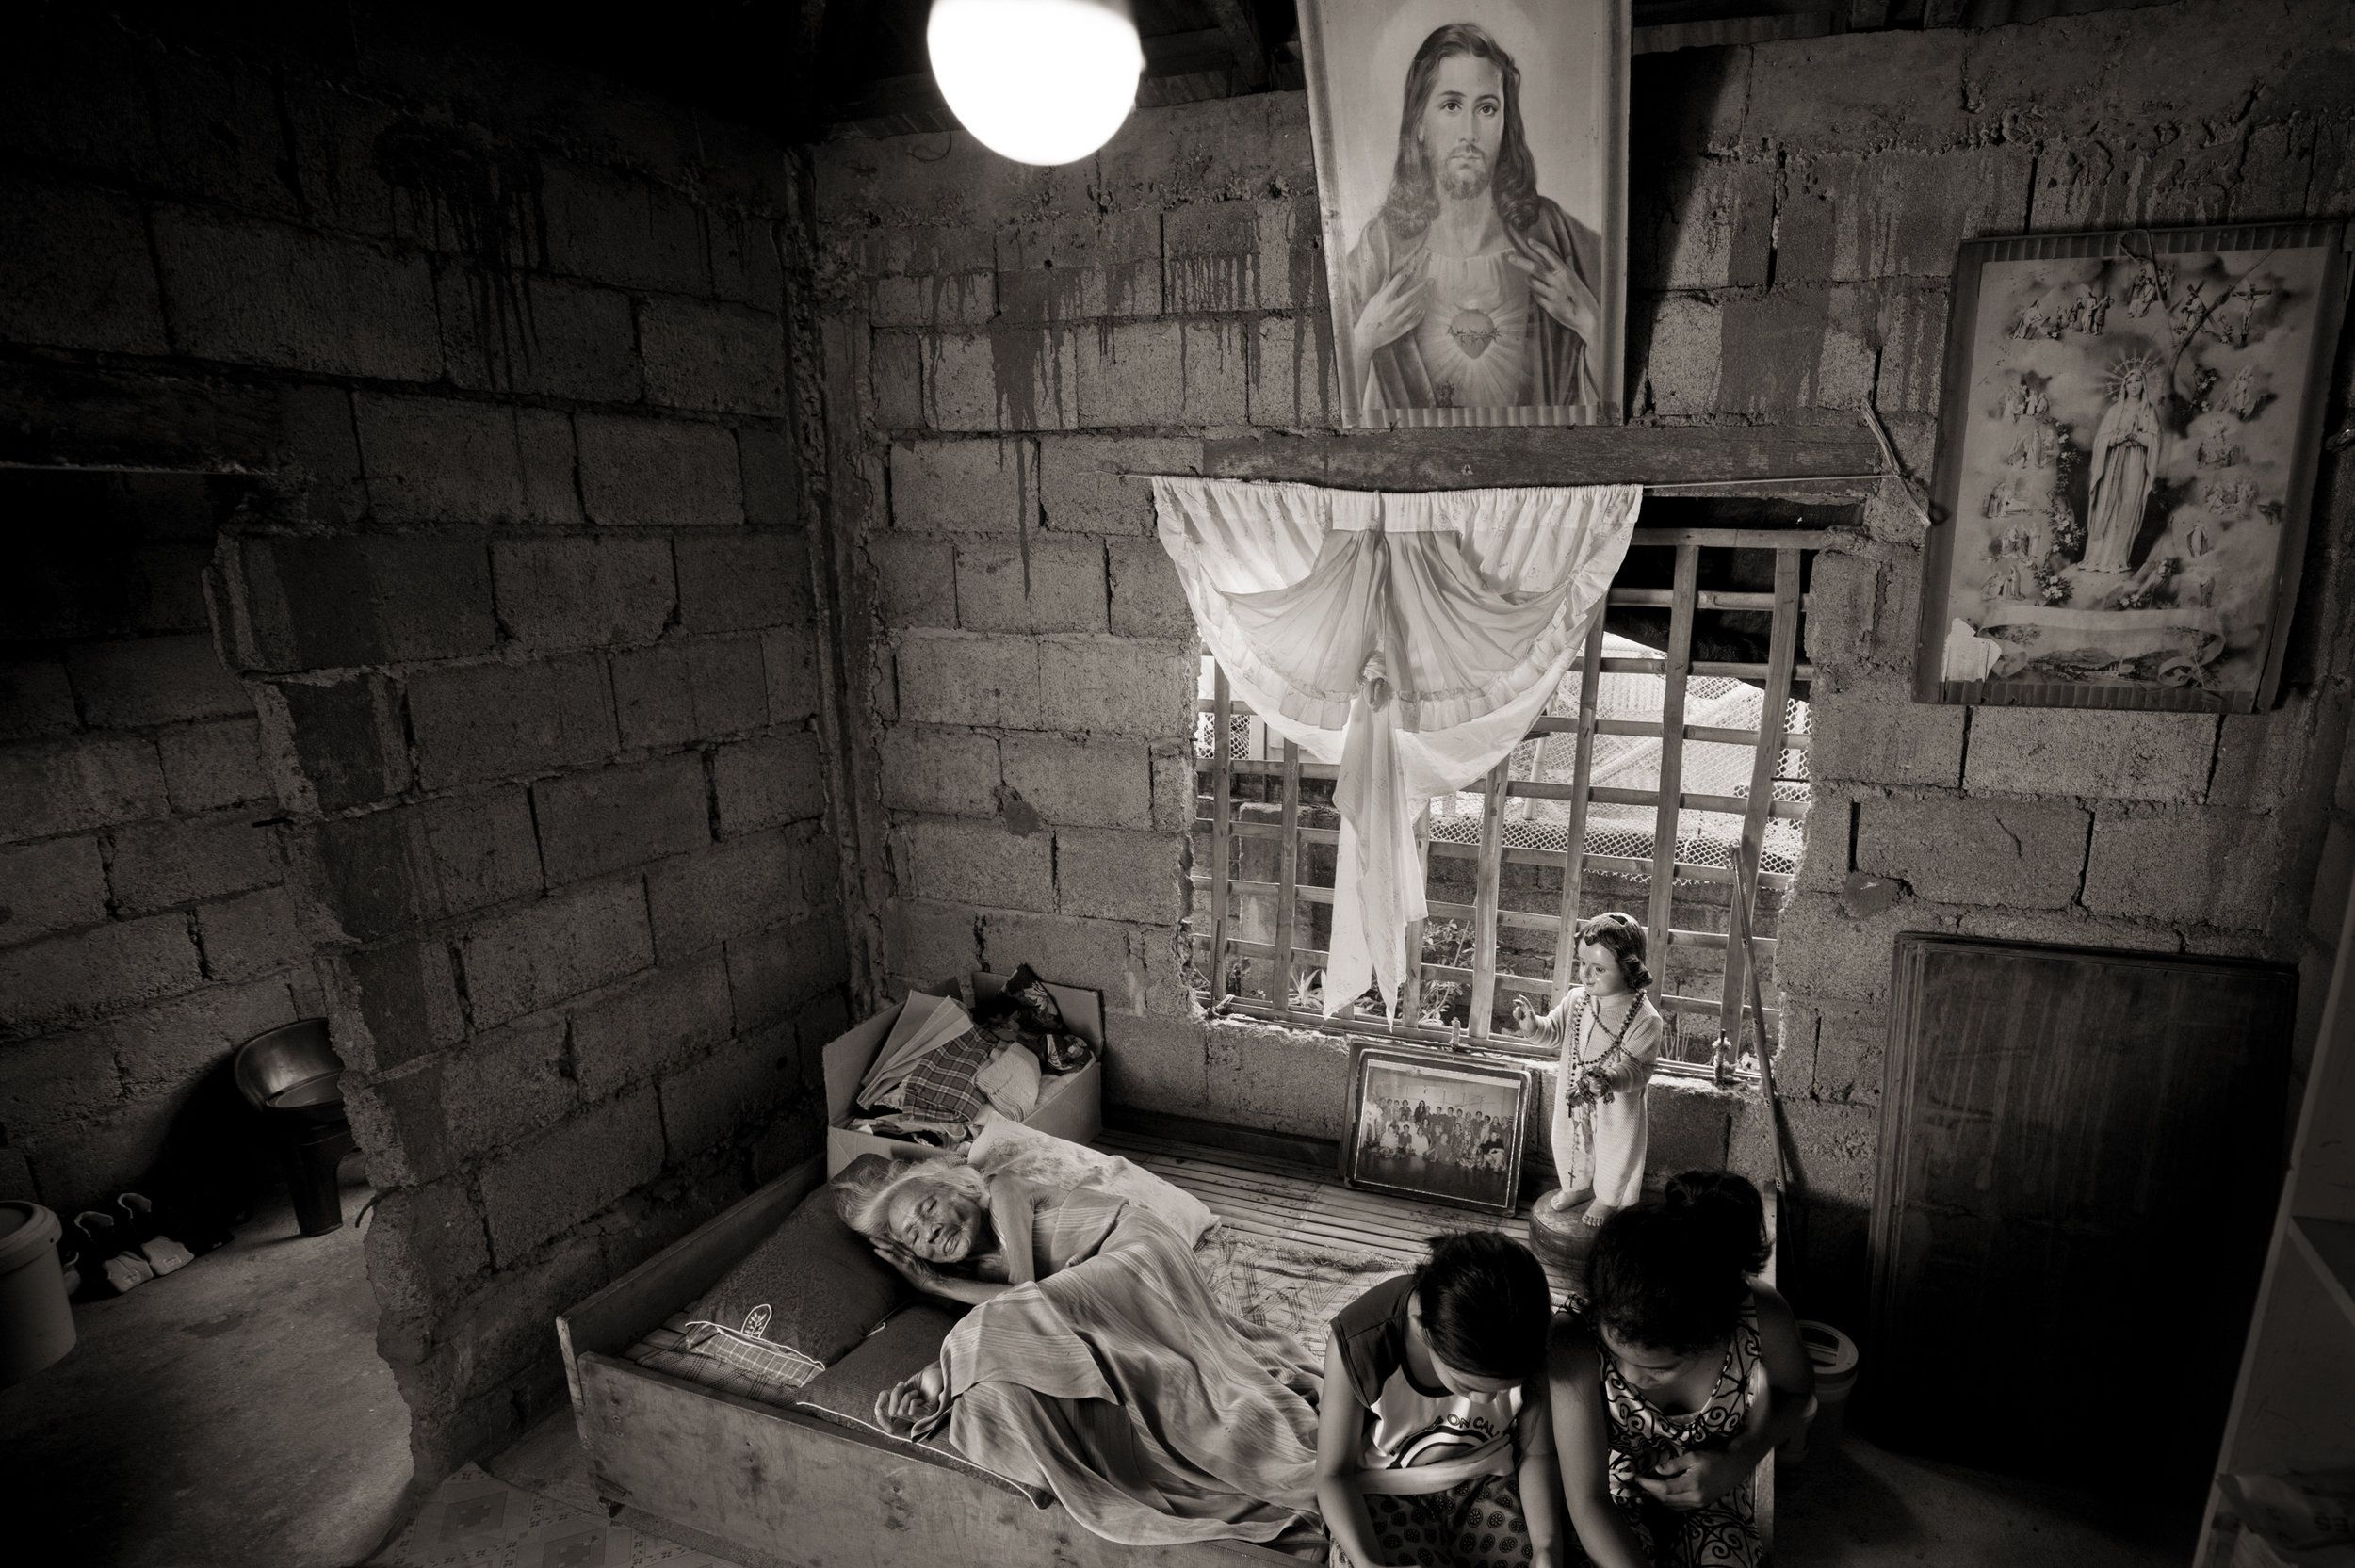 Juliana dela Cruz, 92, lies at her home in Roxas City on May 27, 2019. She died Sept. 12 of that year. In 1998, she testified: "At the garrison, they imprisoned me in a room. The cook was the only one who could give me food. The only other ones I saw were the three soldiers who came into my room every night and raped me three to five times a night in the course of one month." Image by Cheryl Diaz Meyer. Philippines, 2019.